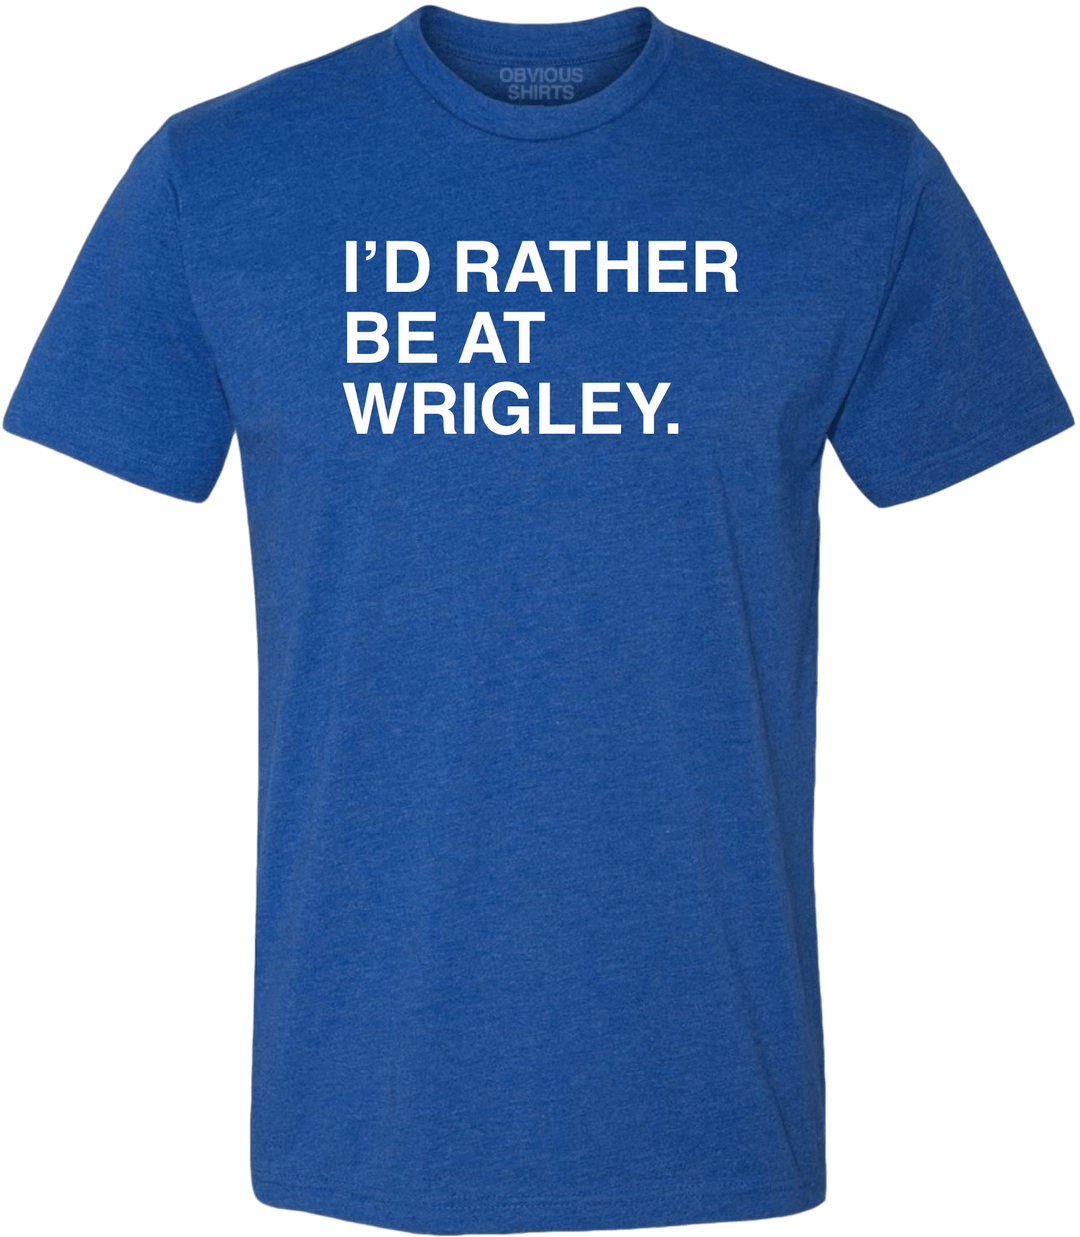 I'D RATHER BE AT WRIGLEY. - OBVIOUS SHIRTS.